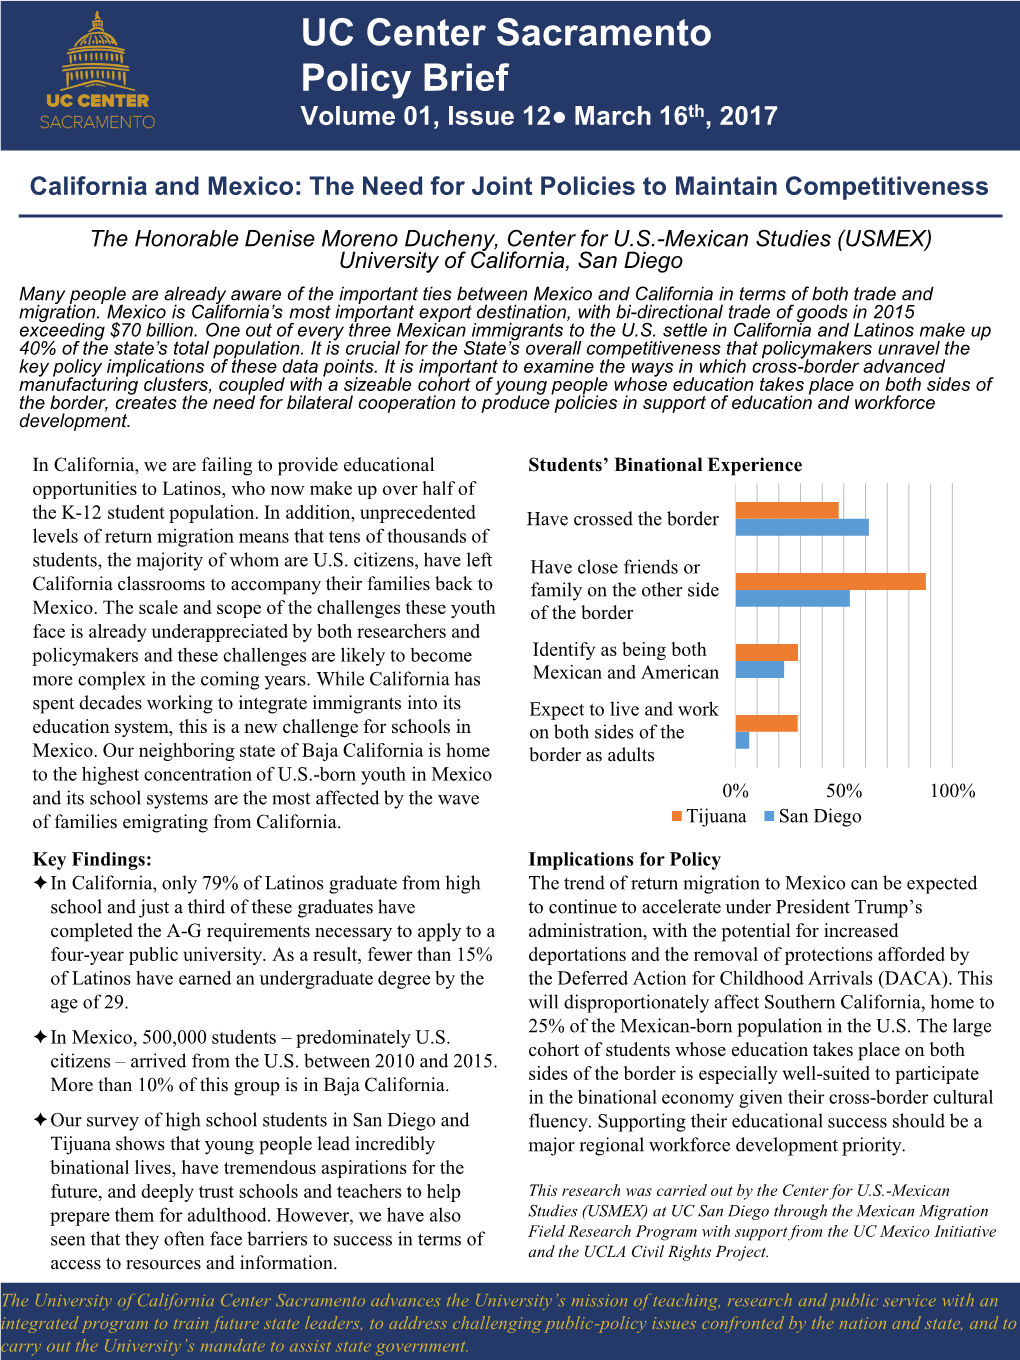 California and Mexico: the Need for Joint Policies to Maintain Competitiveness